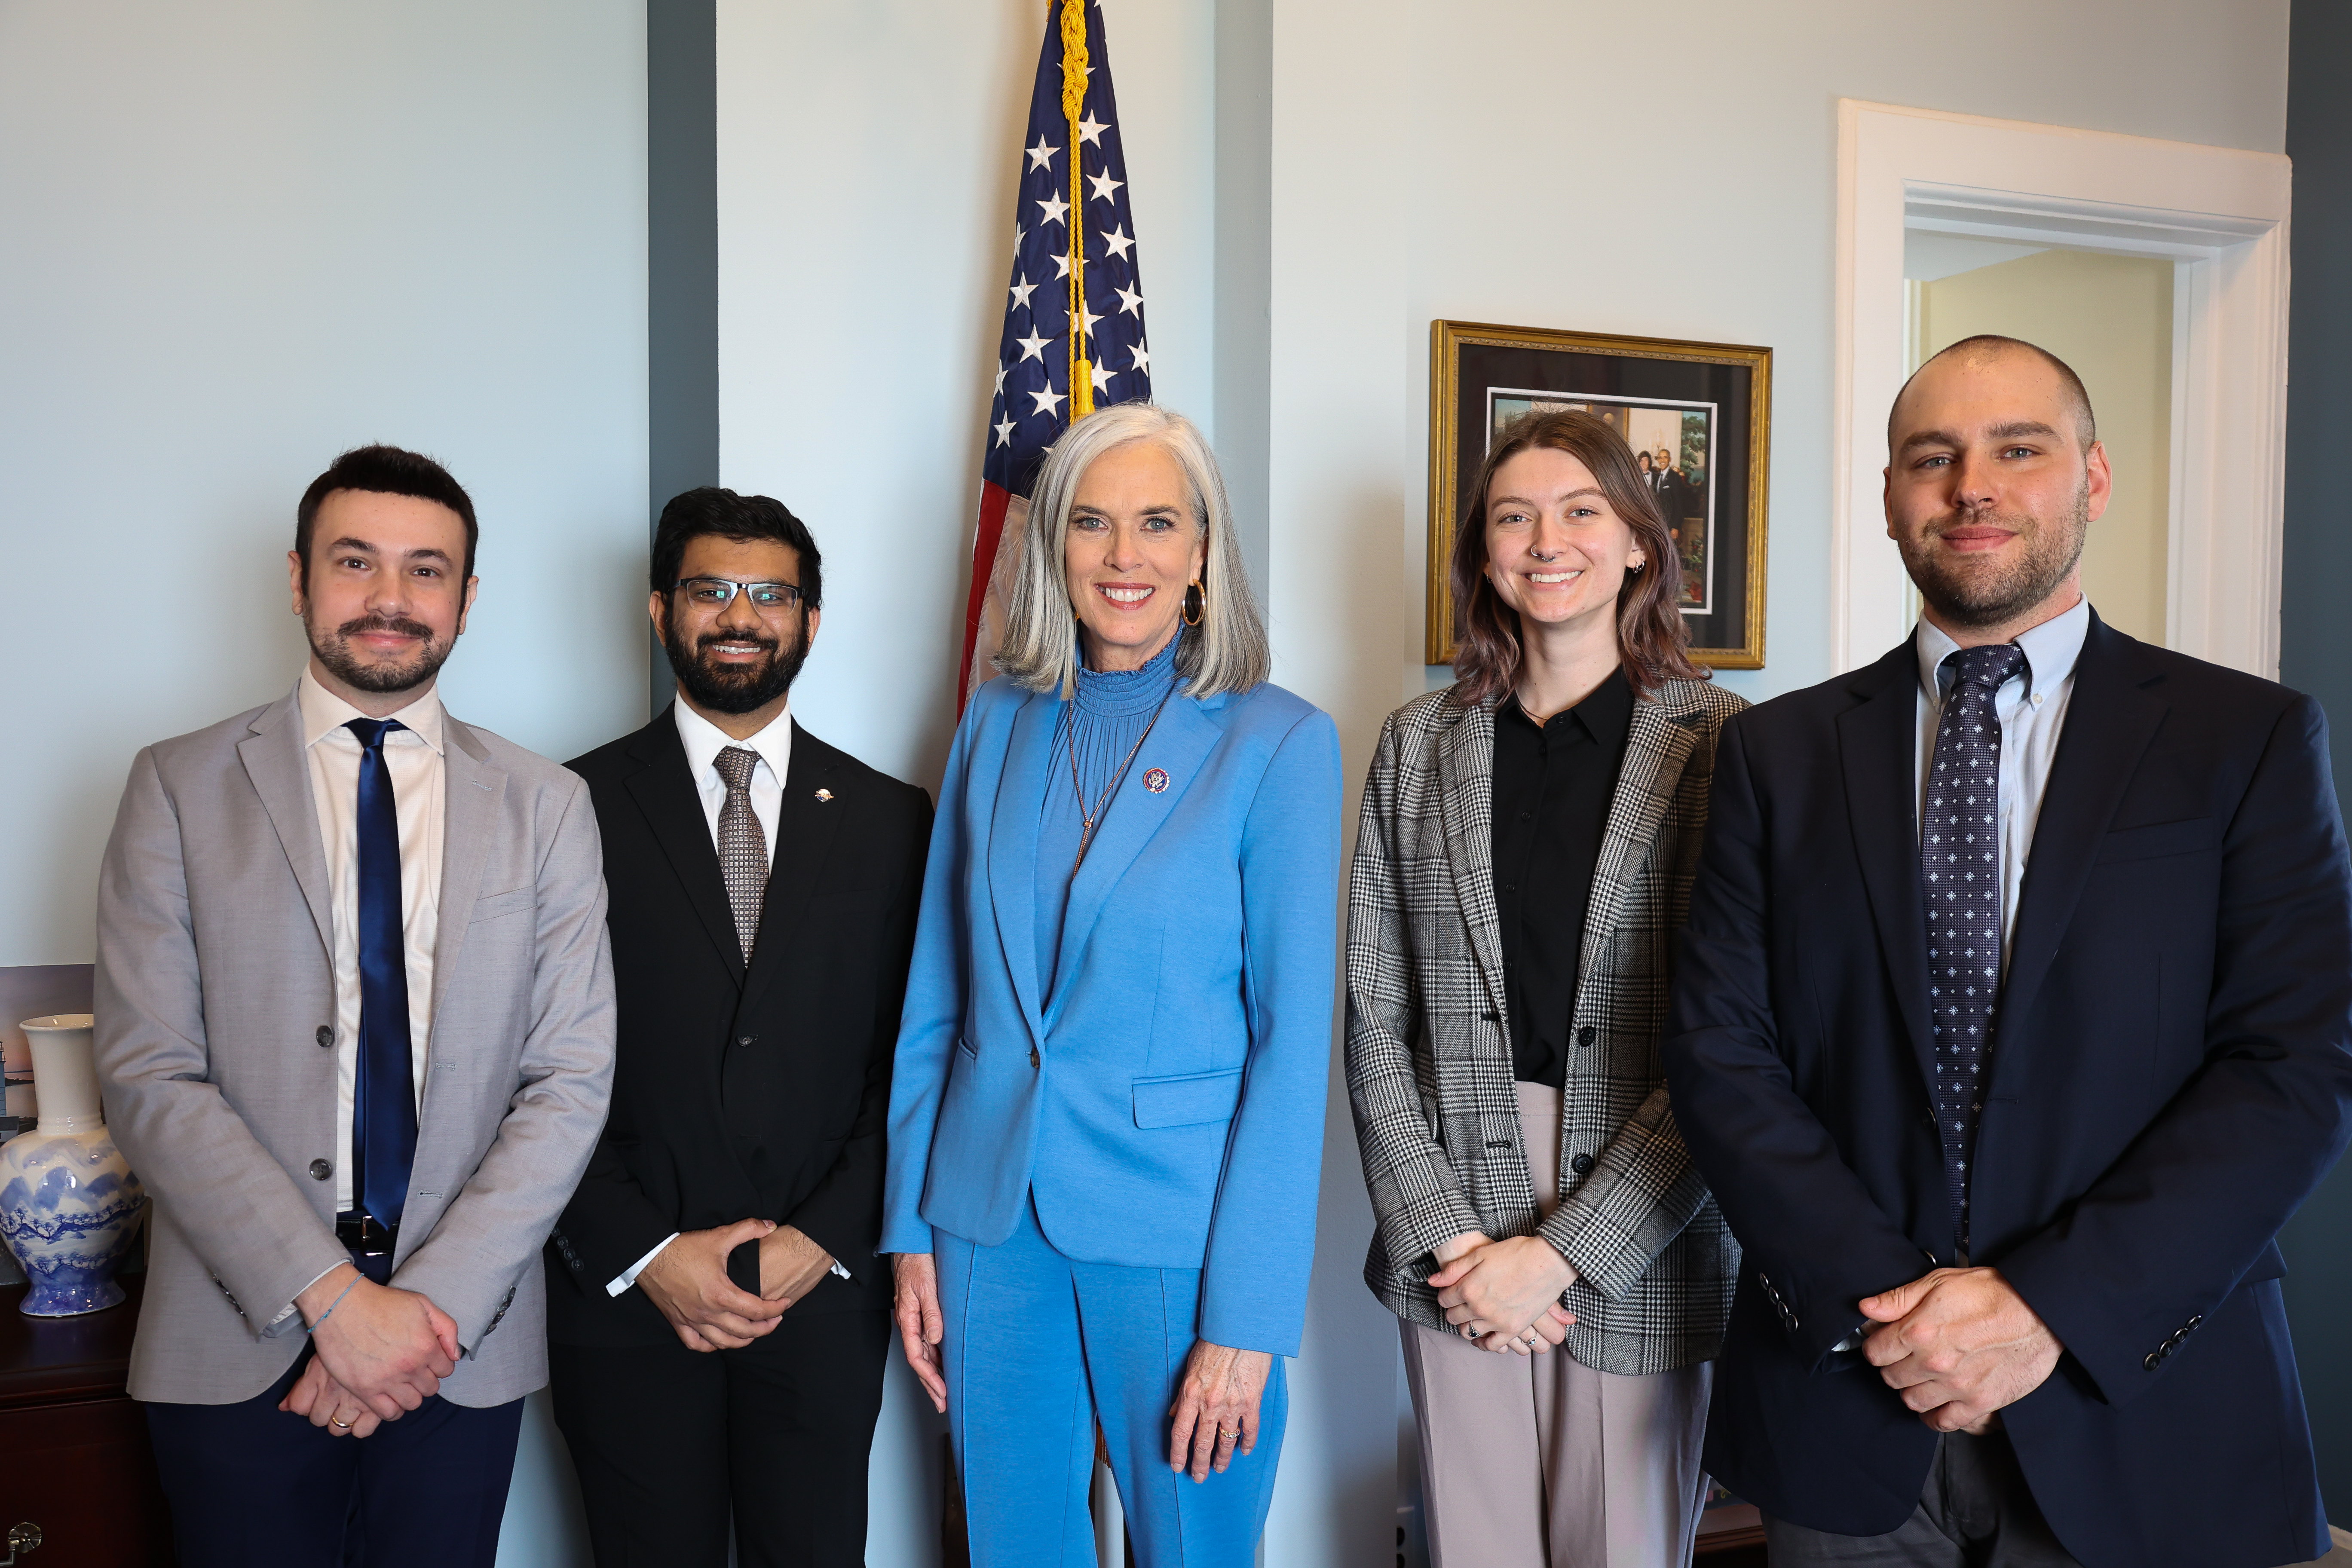 A picture of several AAS Congressional Visits Day Volunteers with Rep. Katherine Clark in her office. From left to right: Fabio Pacucci, Yaswant Devarakonda, Rep. Clark, Caeley Pittman, and Tim Sacco. 